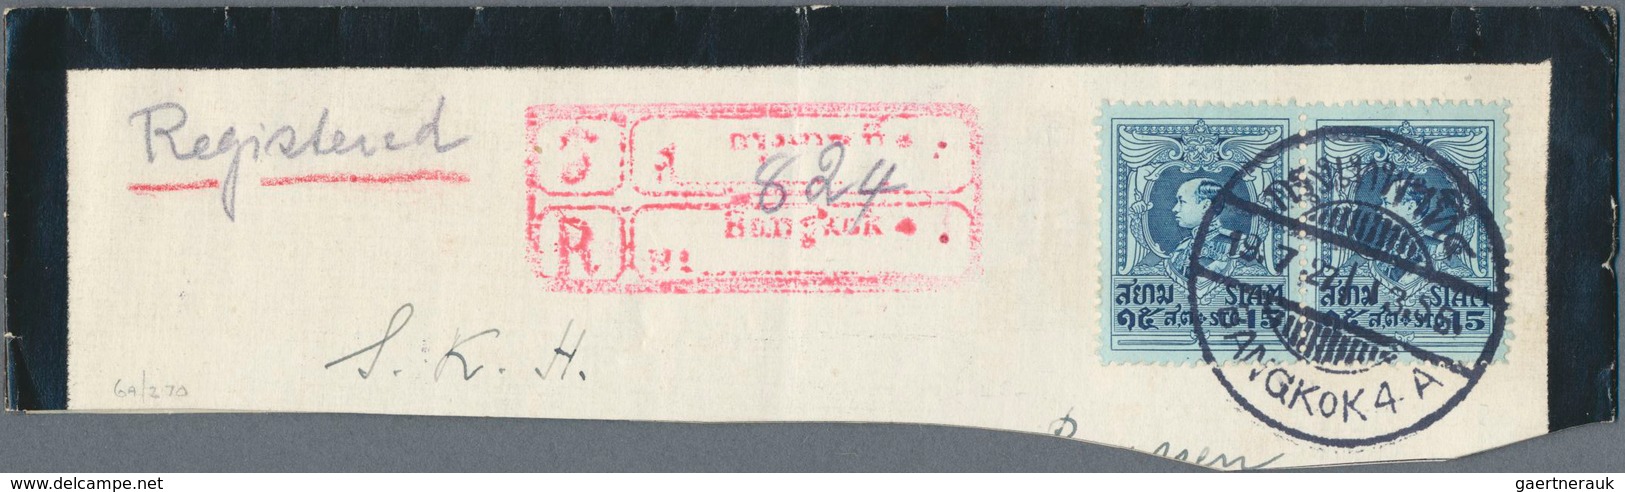 09956 Thailand: 1925-27 Two 'On Post & Telegraph Service' Official Mourning Envelopes From Bangkok To Bern - Thailand